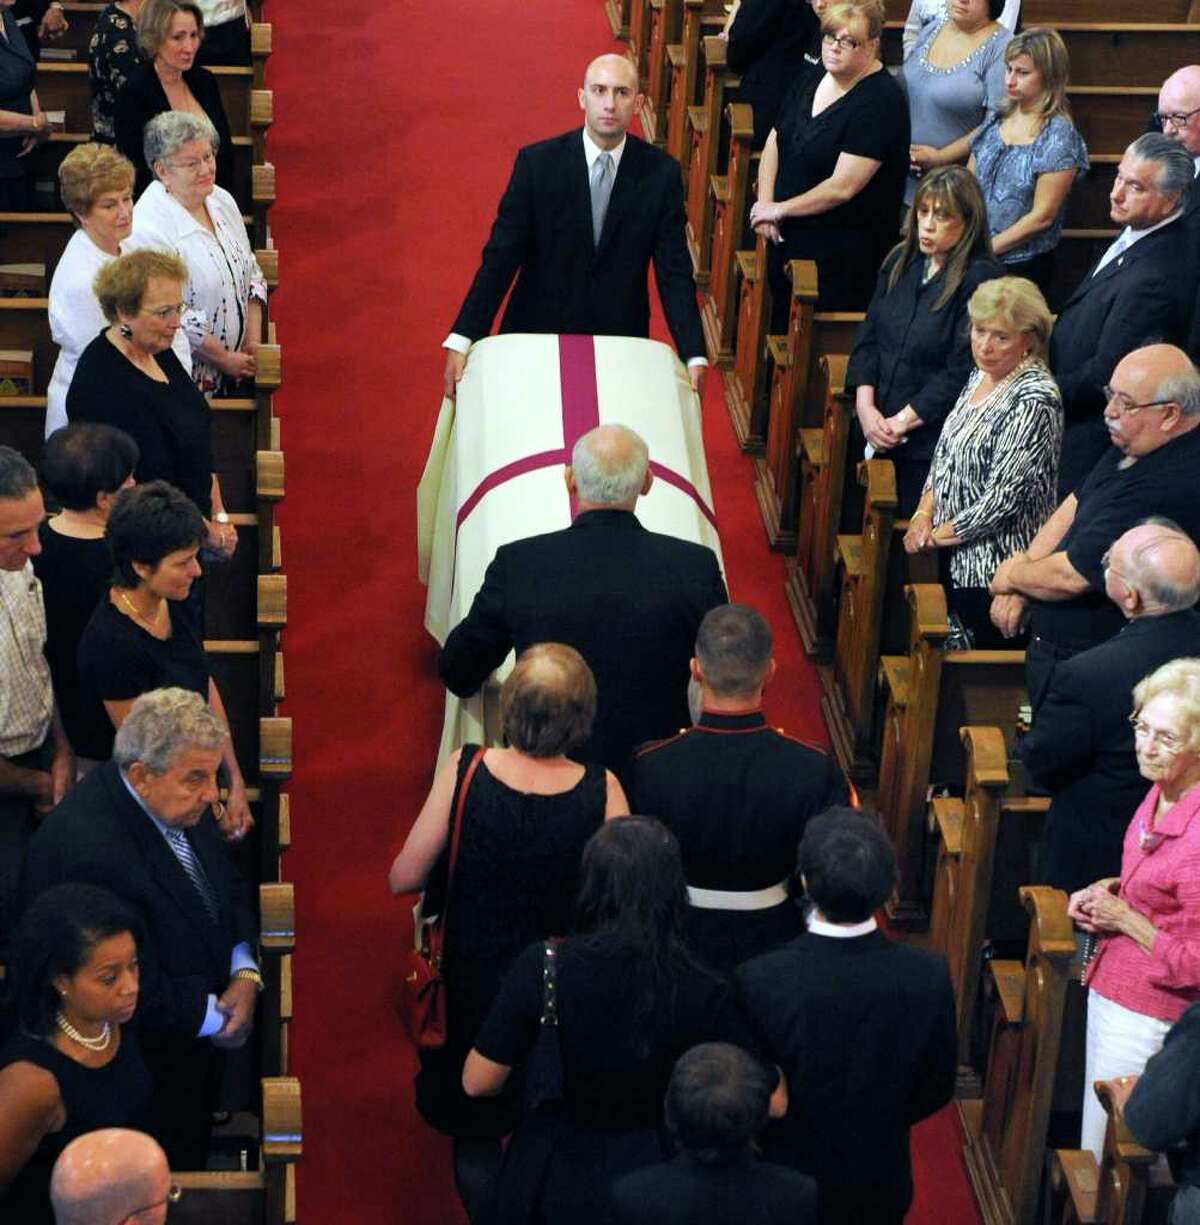 The coffin bearing the body of former Danbury Mayor James E. Dyer is brought into St. Joseph Church in Danbury Monday morning, Aug. 1, 2011.